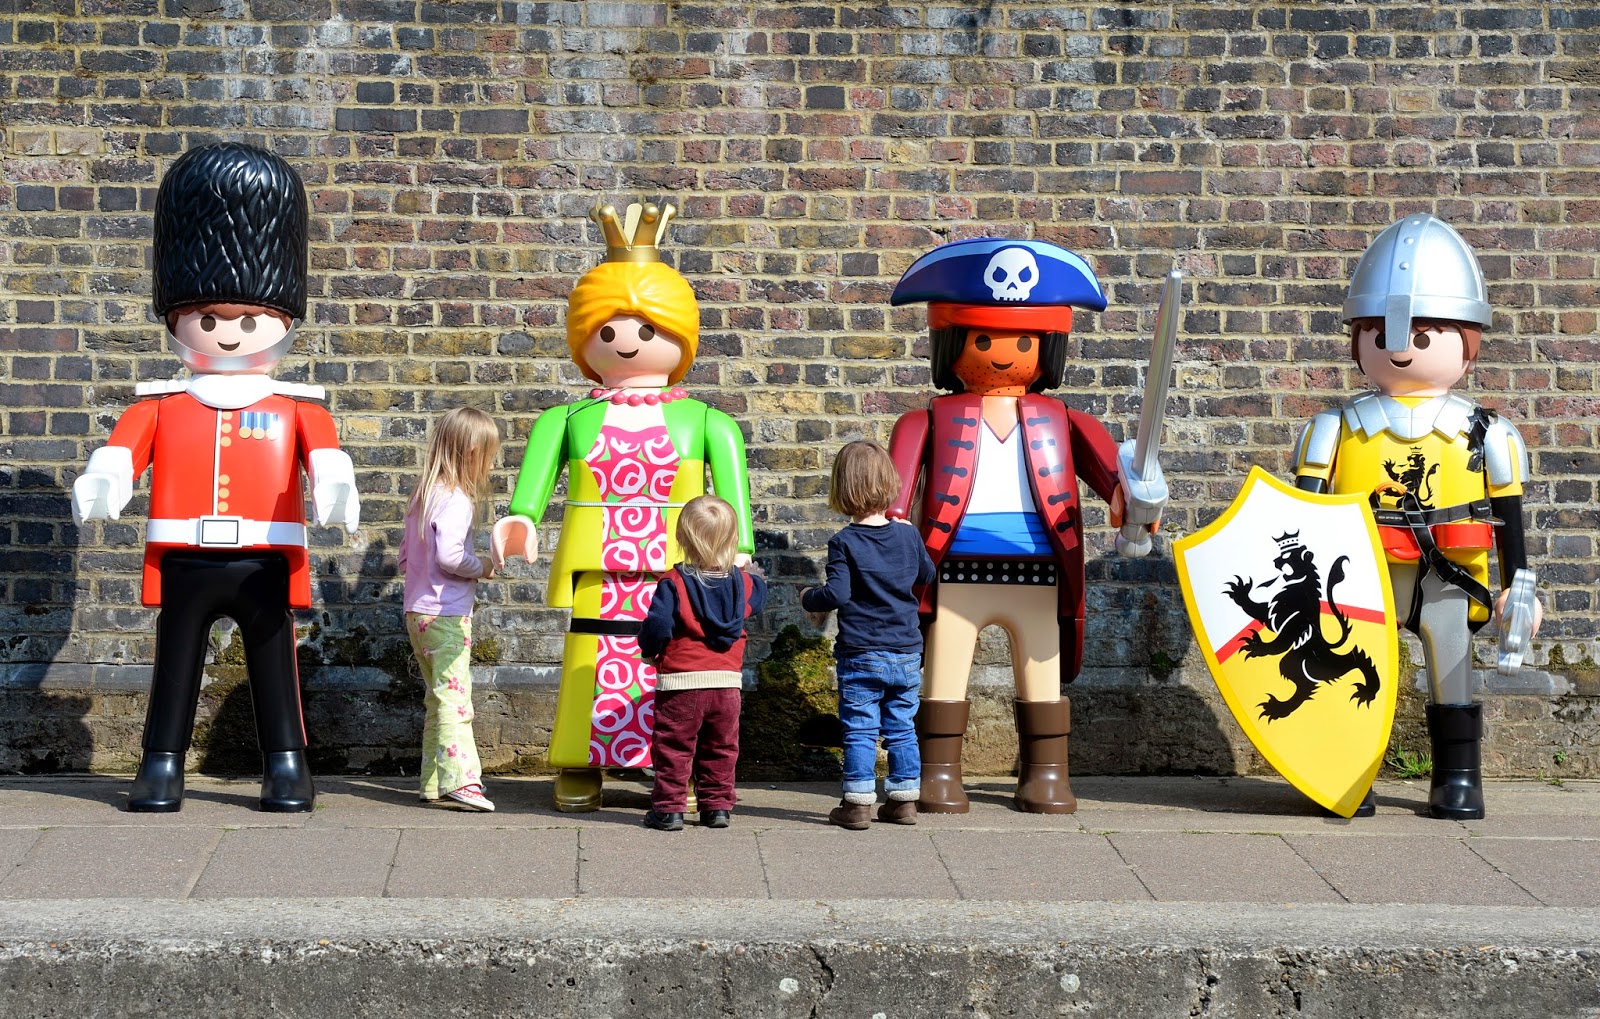 Playmobil: Forty years young, The Independent